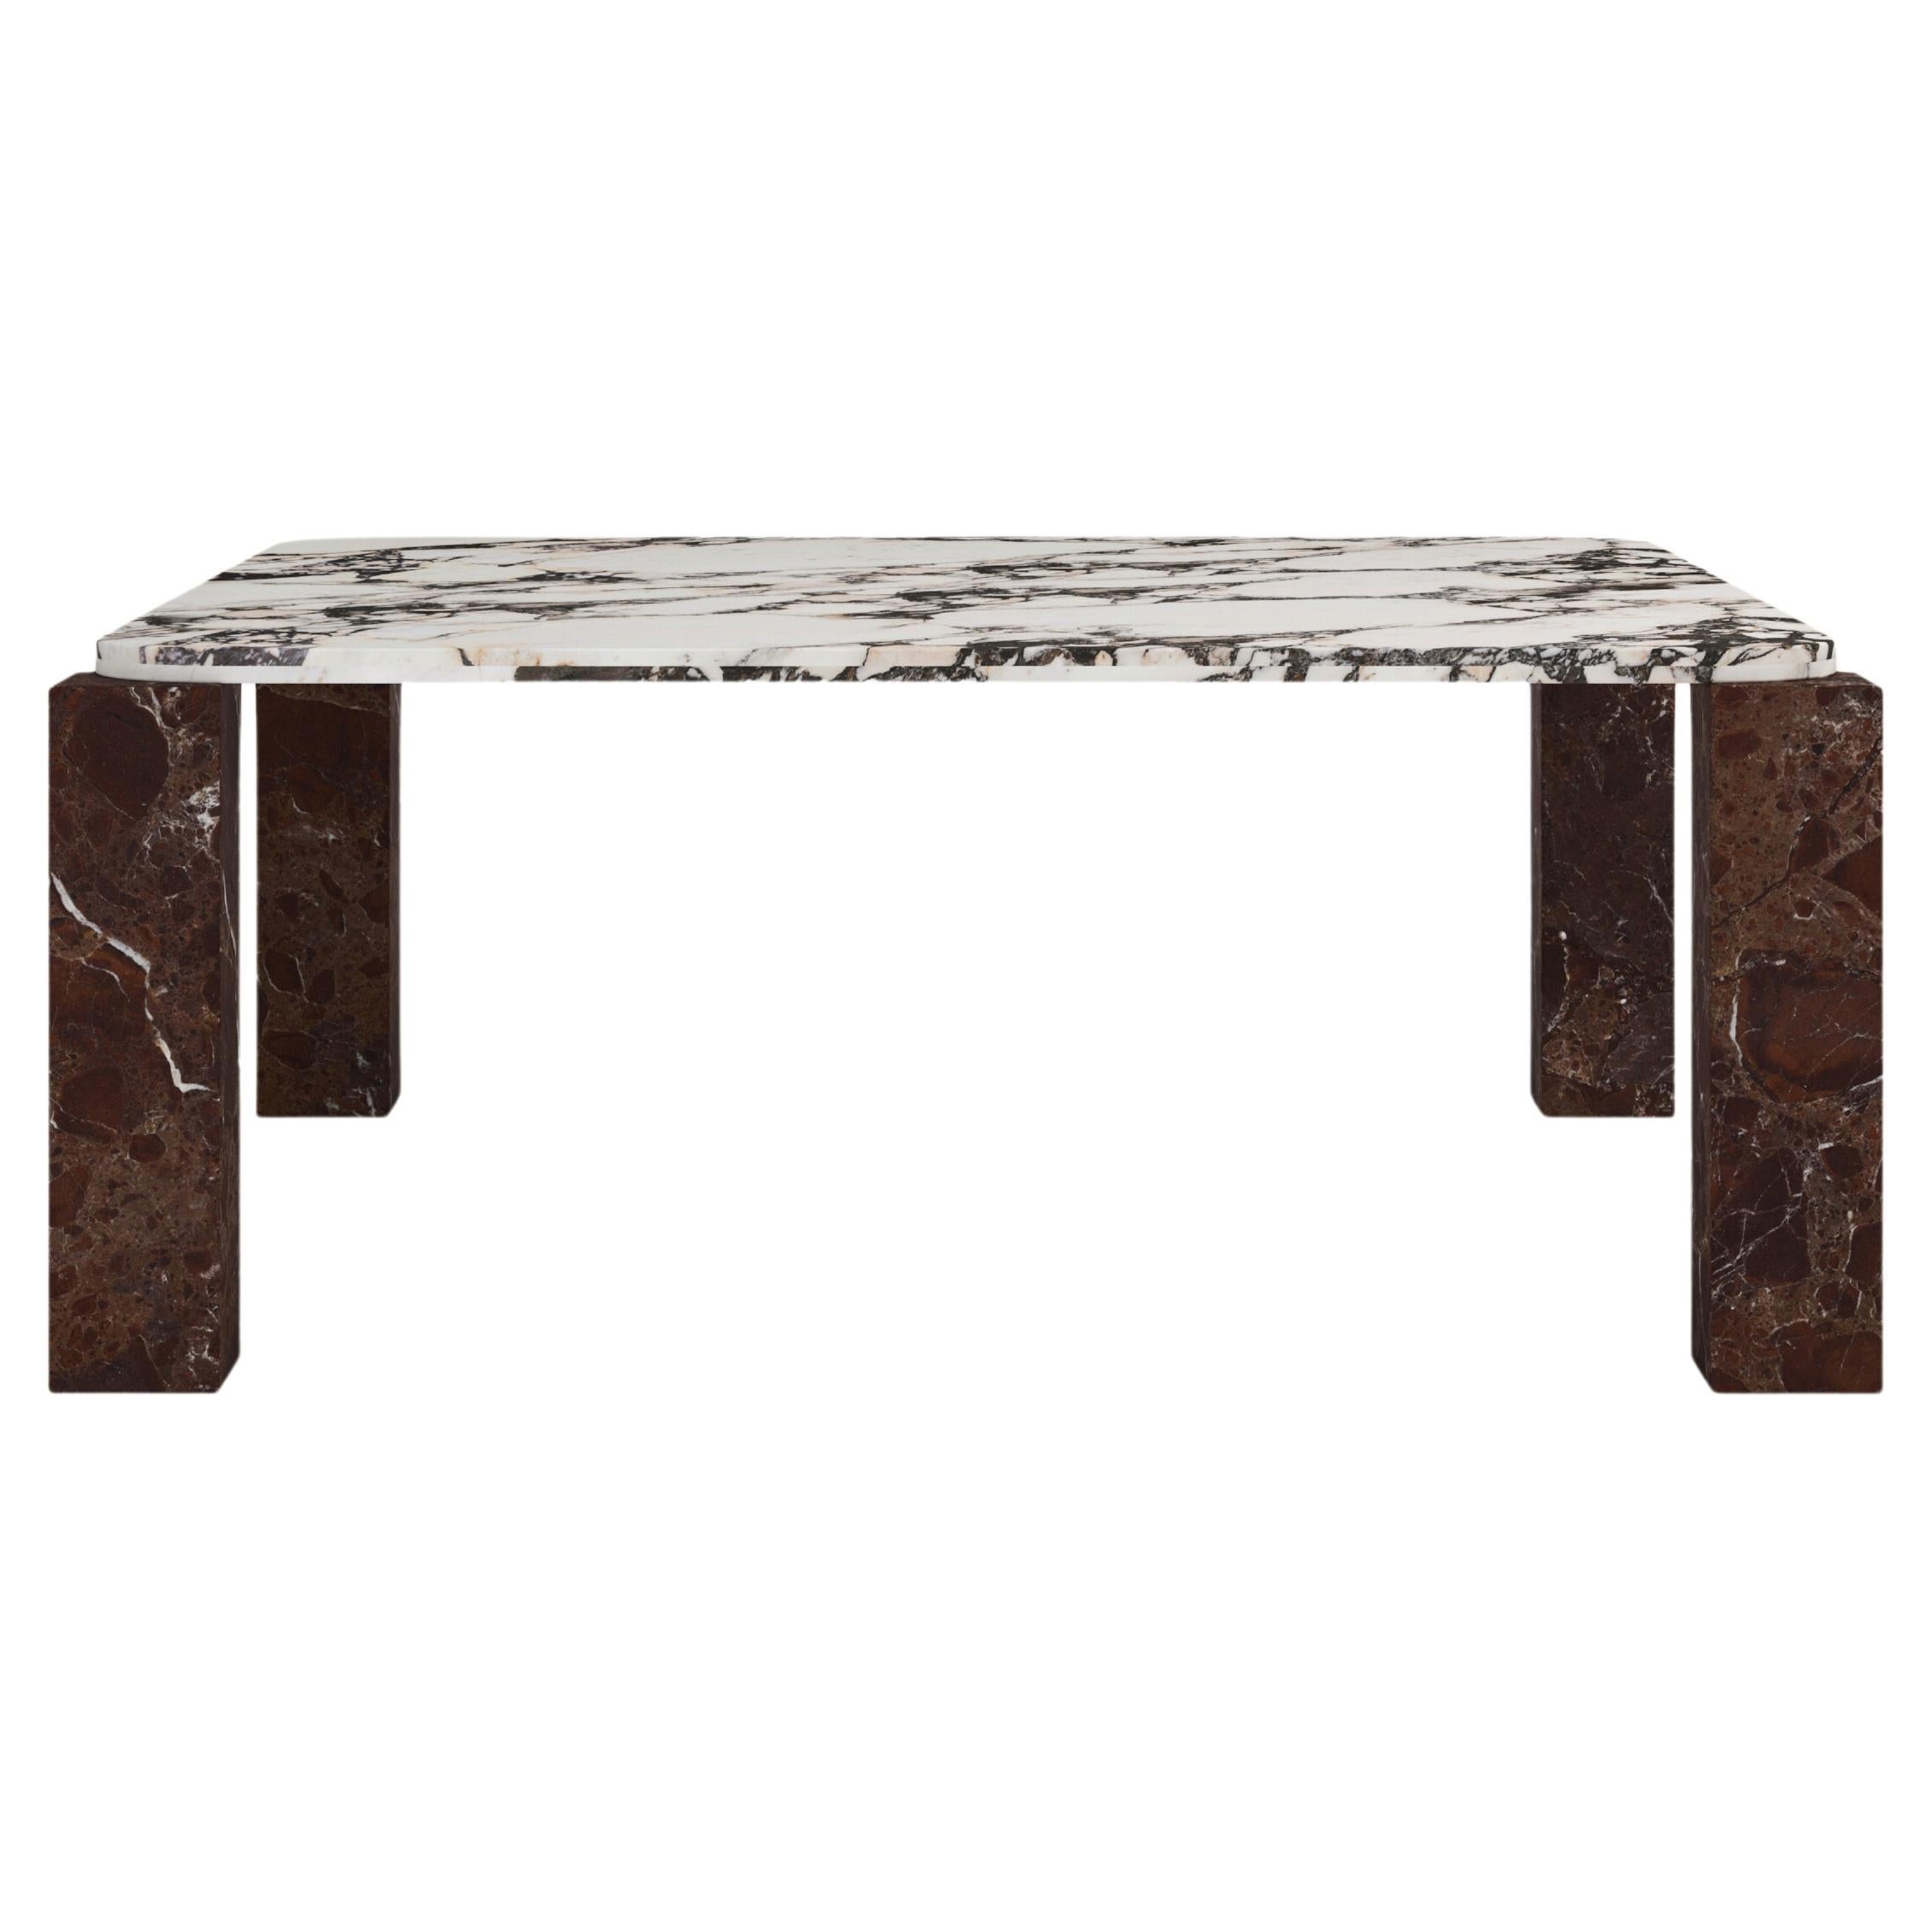 FORM(LA) Cubo Square Dining Table 74”L x 74”W x 30”H Viola & Rosso Marble For Sale